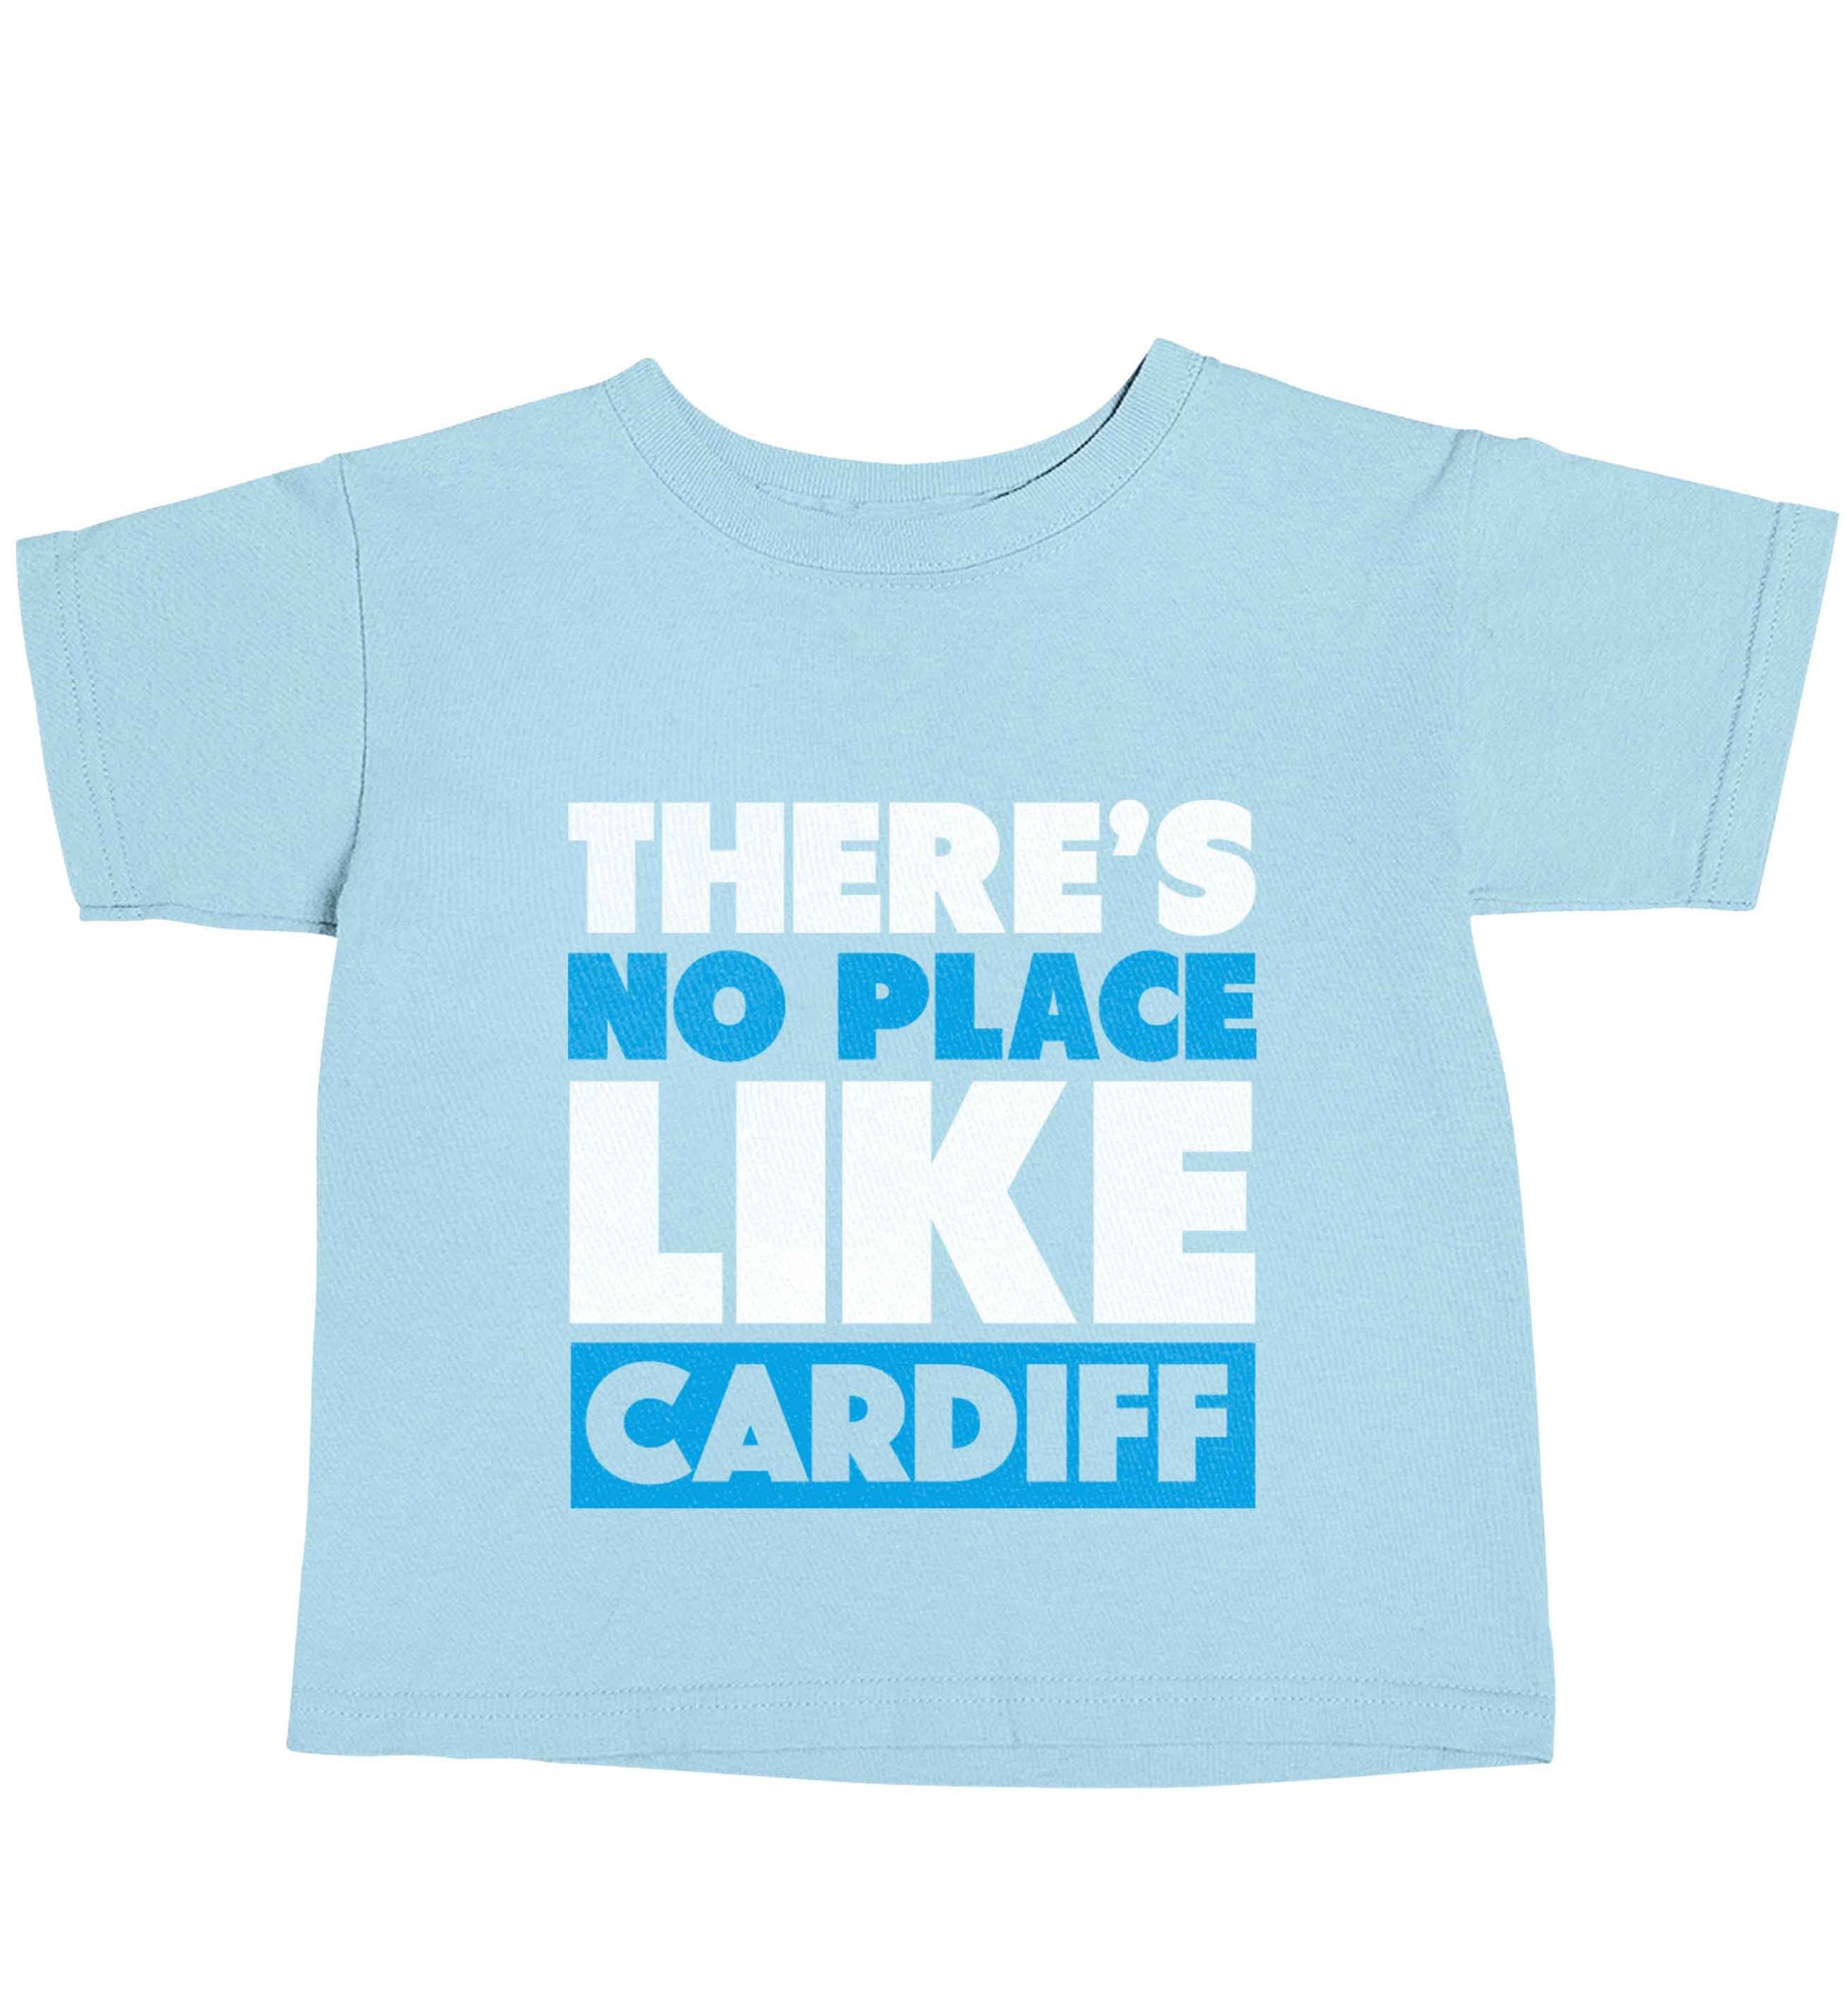 There's no place like Cardiff light blue baby toddler Tshirt 2 Years